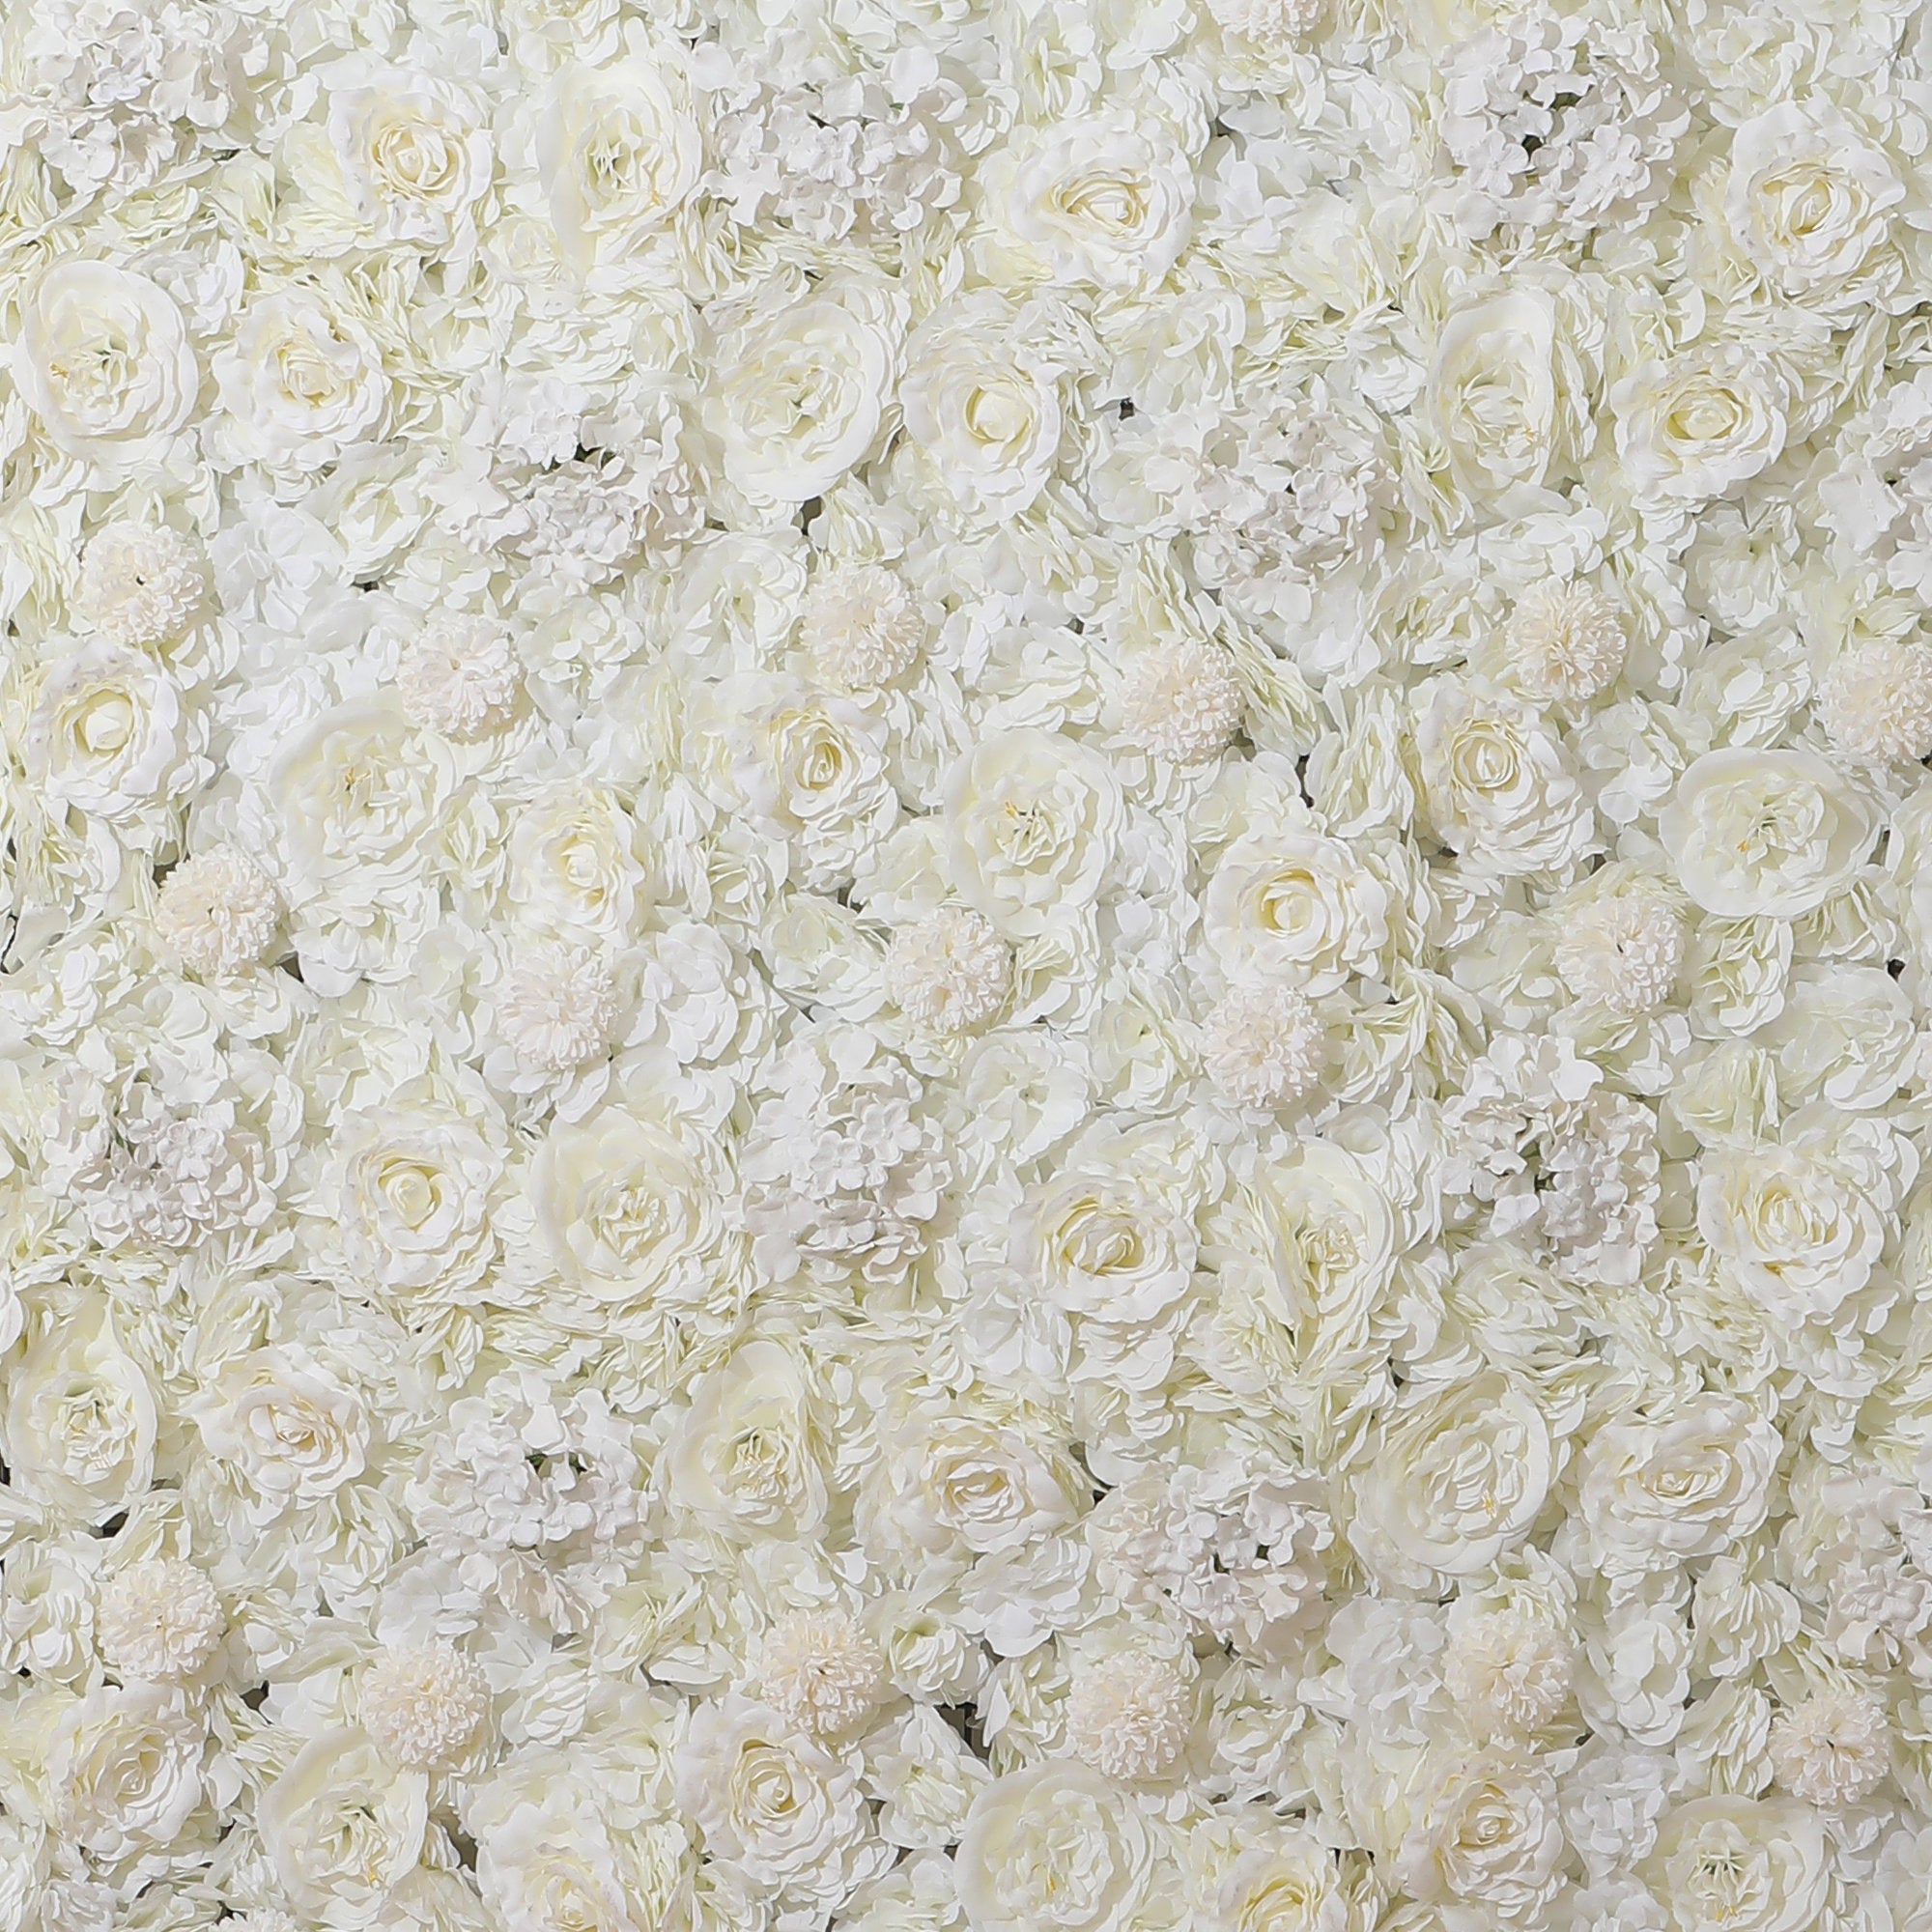 Cream White Flower Wall 3D Artificial Flower Panel Home Shop Party Hol –  IvoryBloomStudios